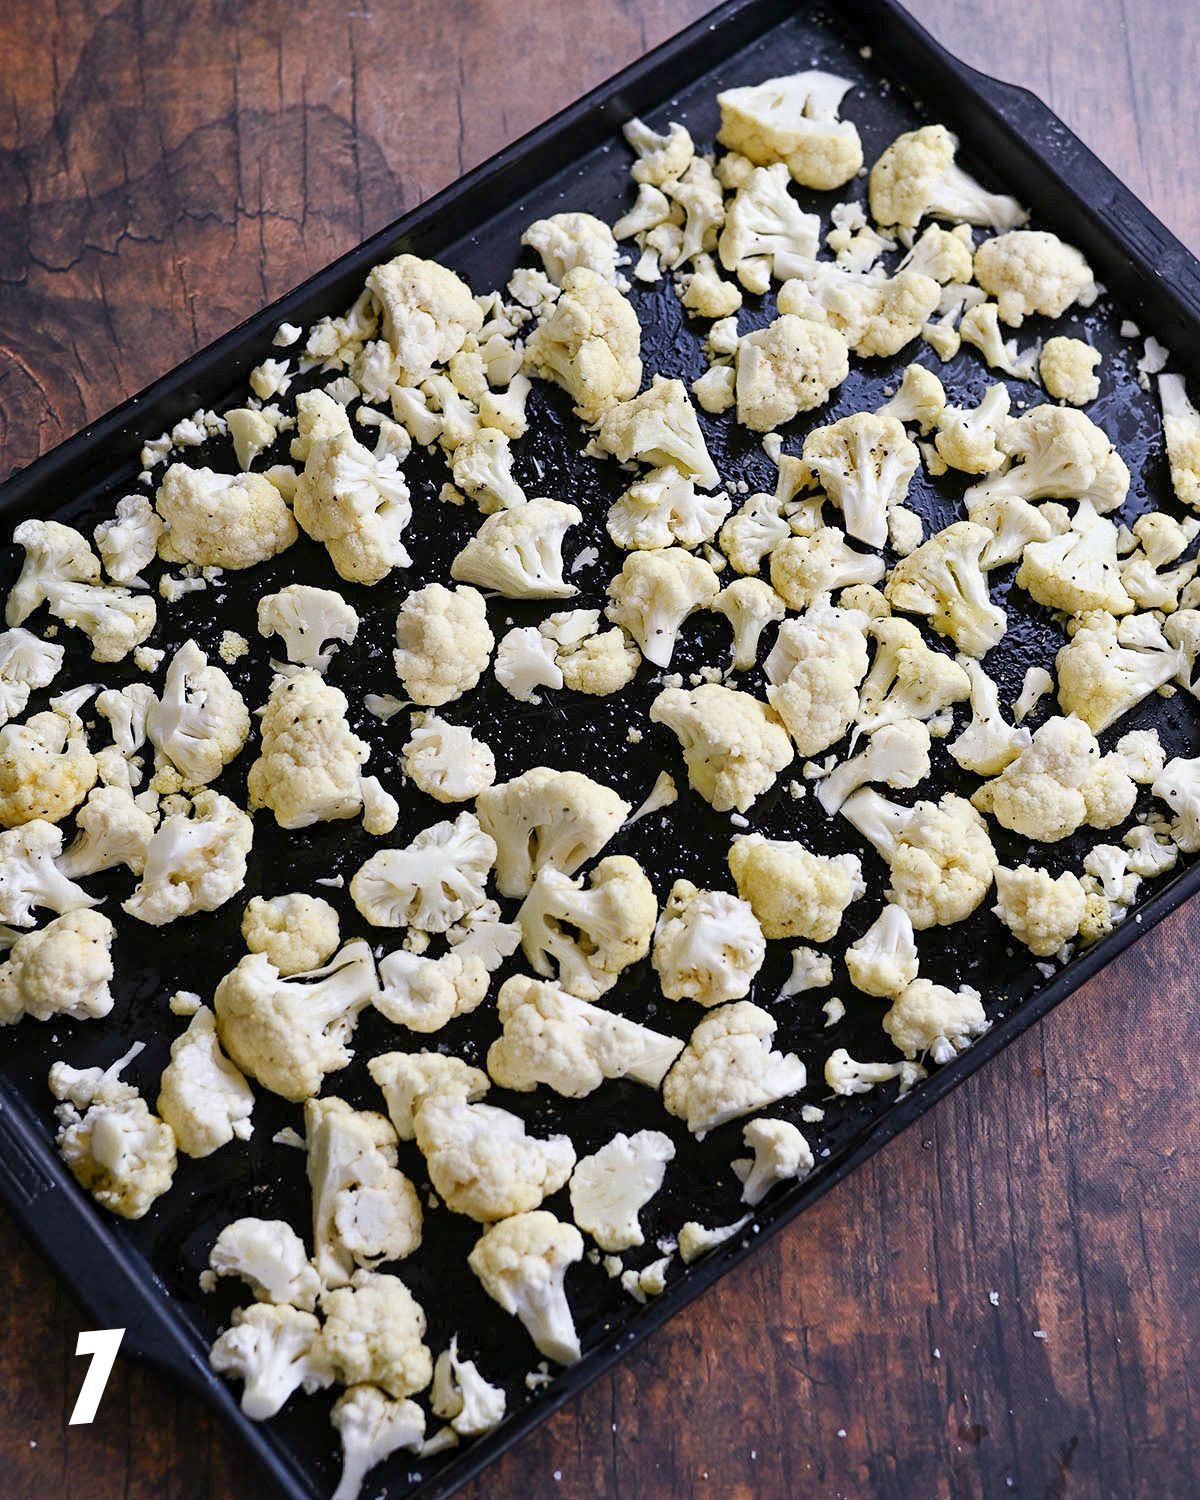 Cauliflower on a baking sheet ready for the oven.